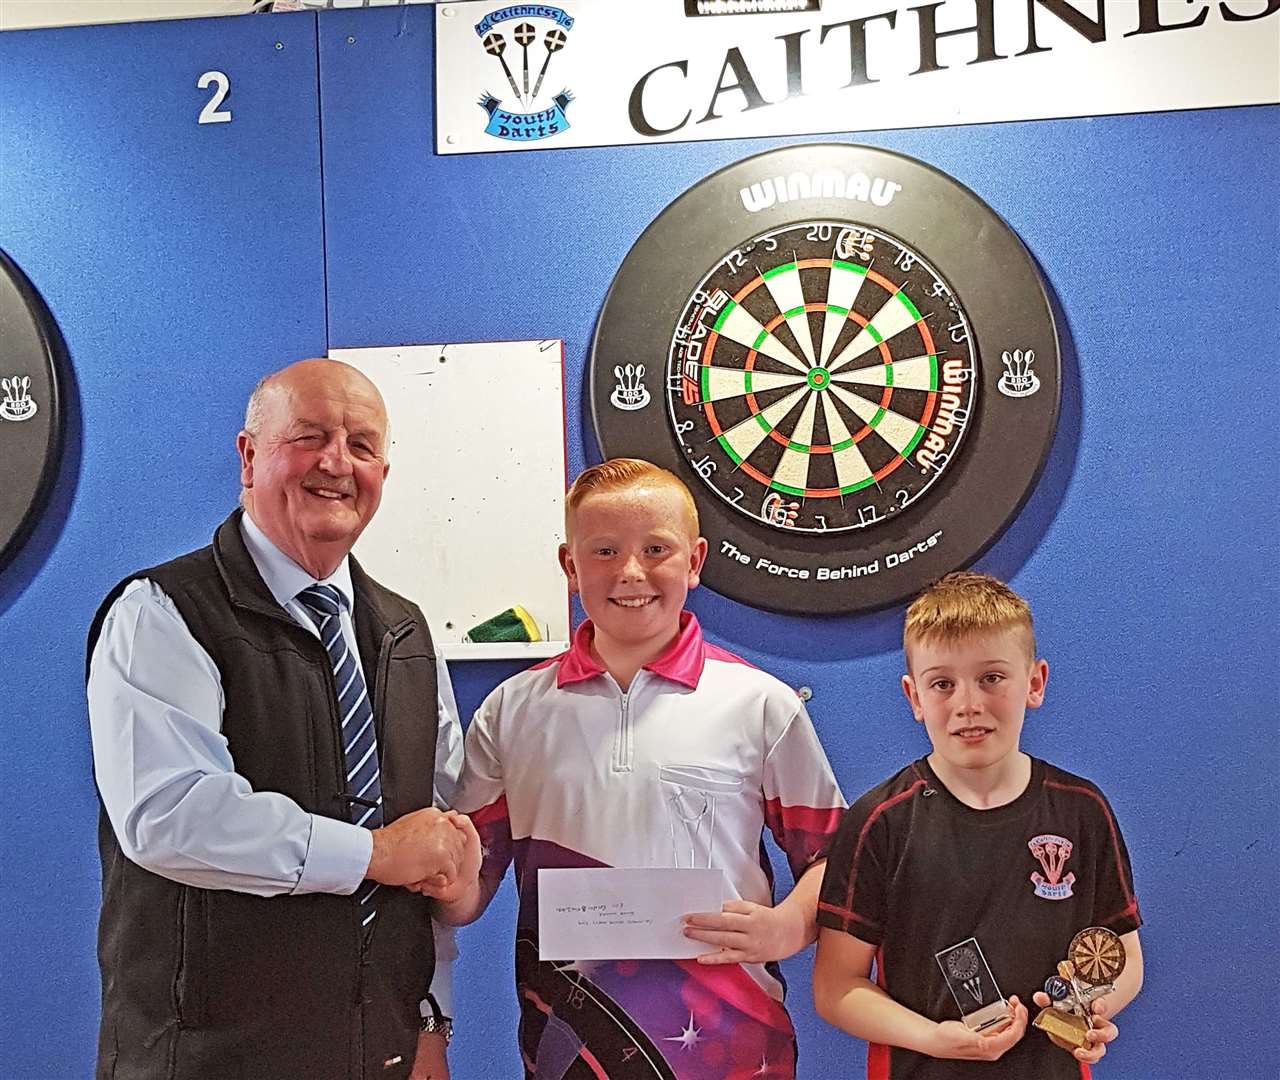 Caithness civic leader Willie Mackay presents Baxter MacIntosh with his winnings, watched by runner-up Logan Moodie.